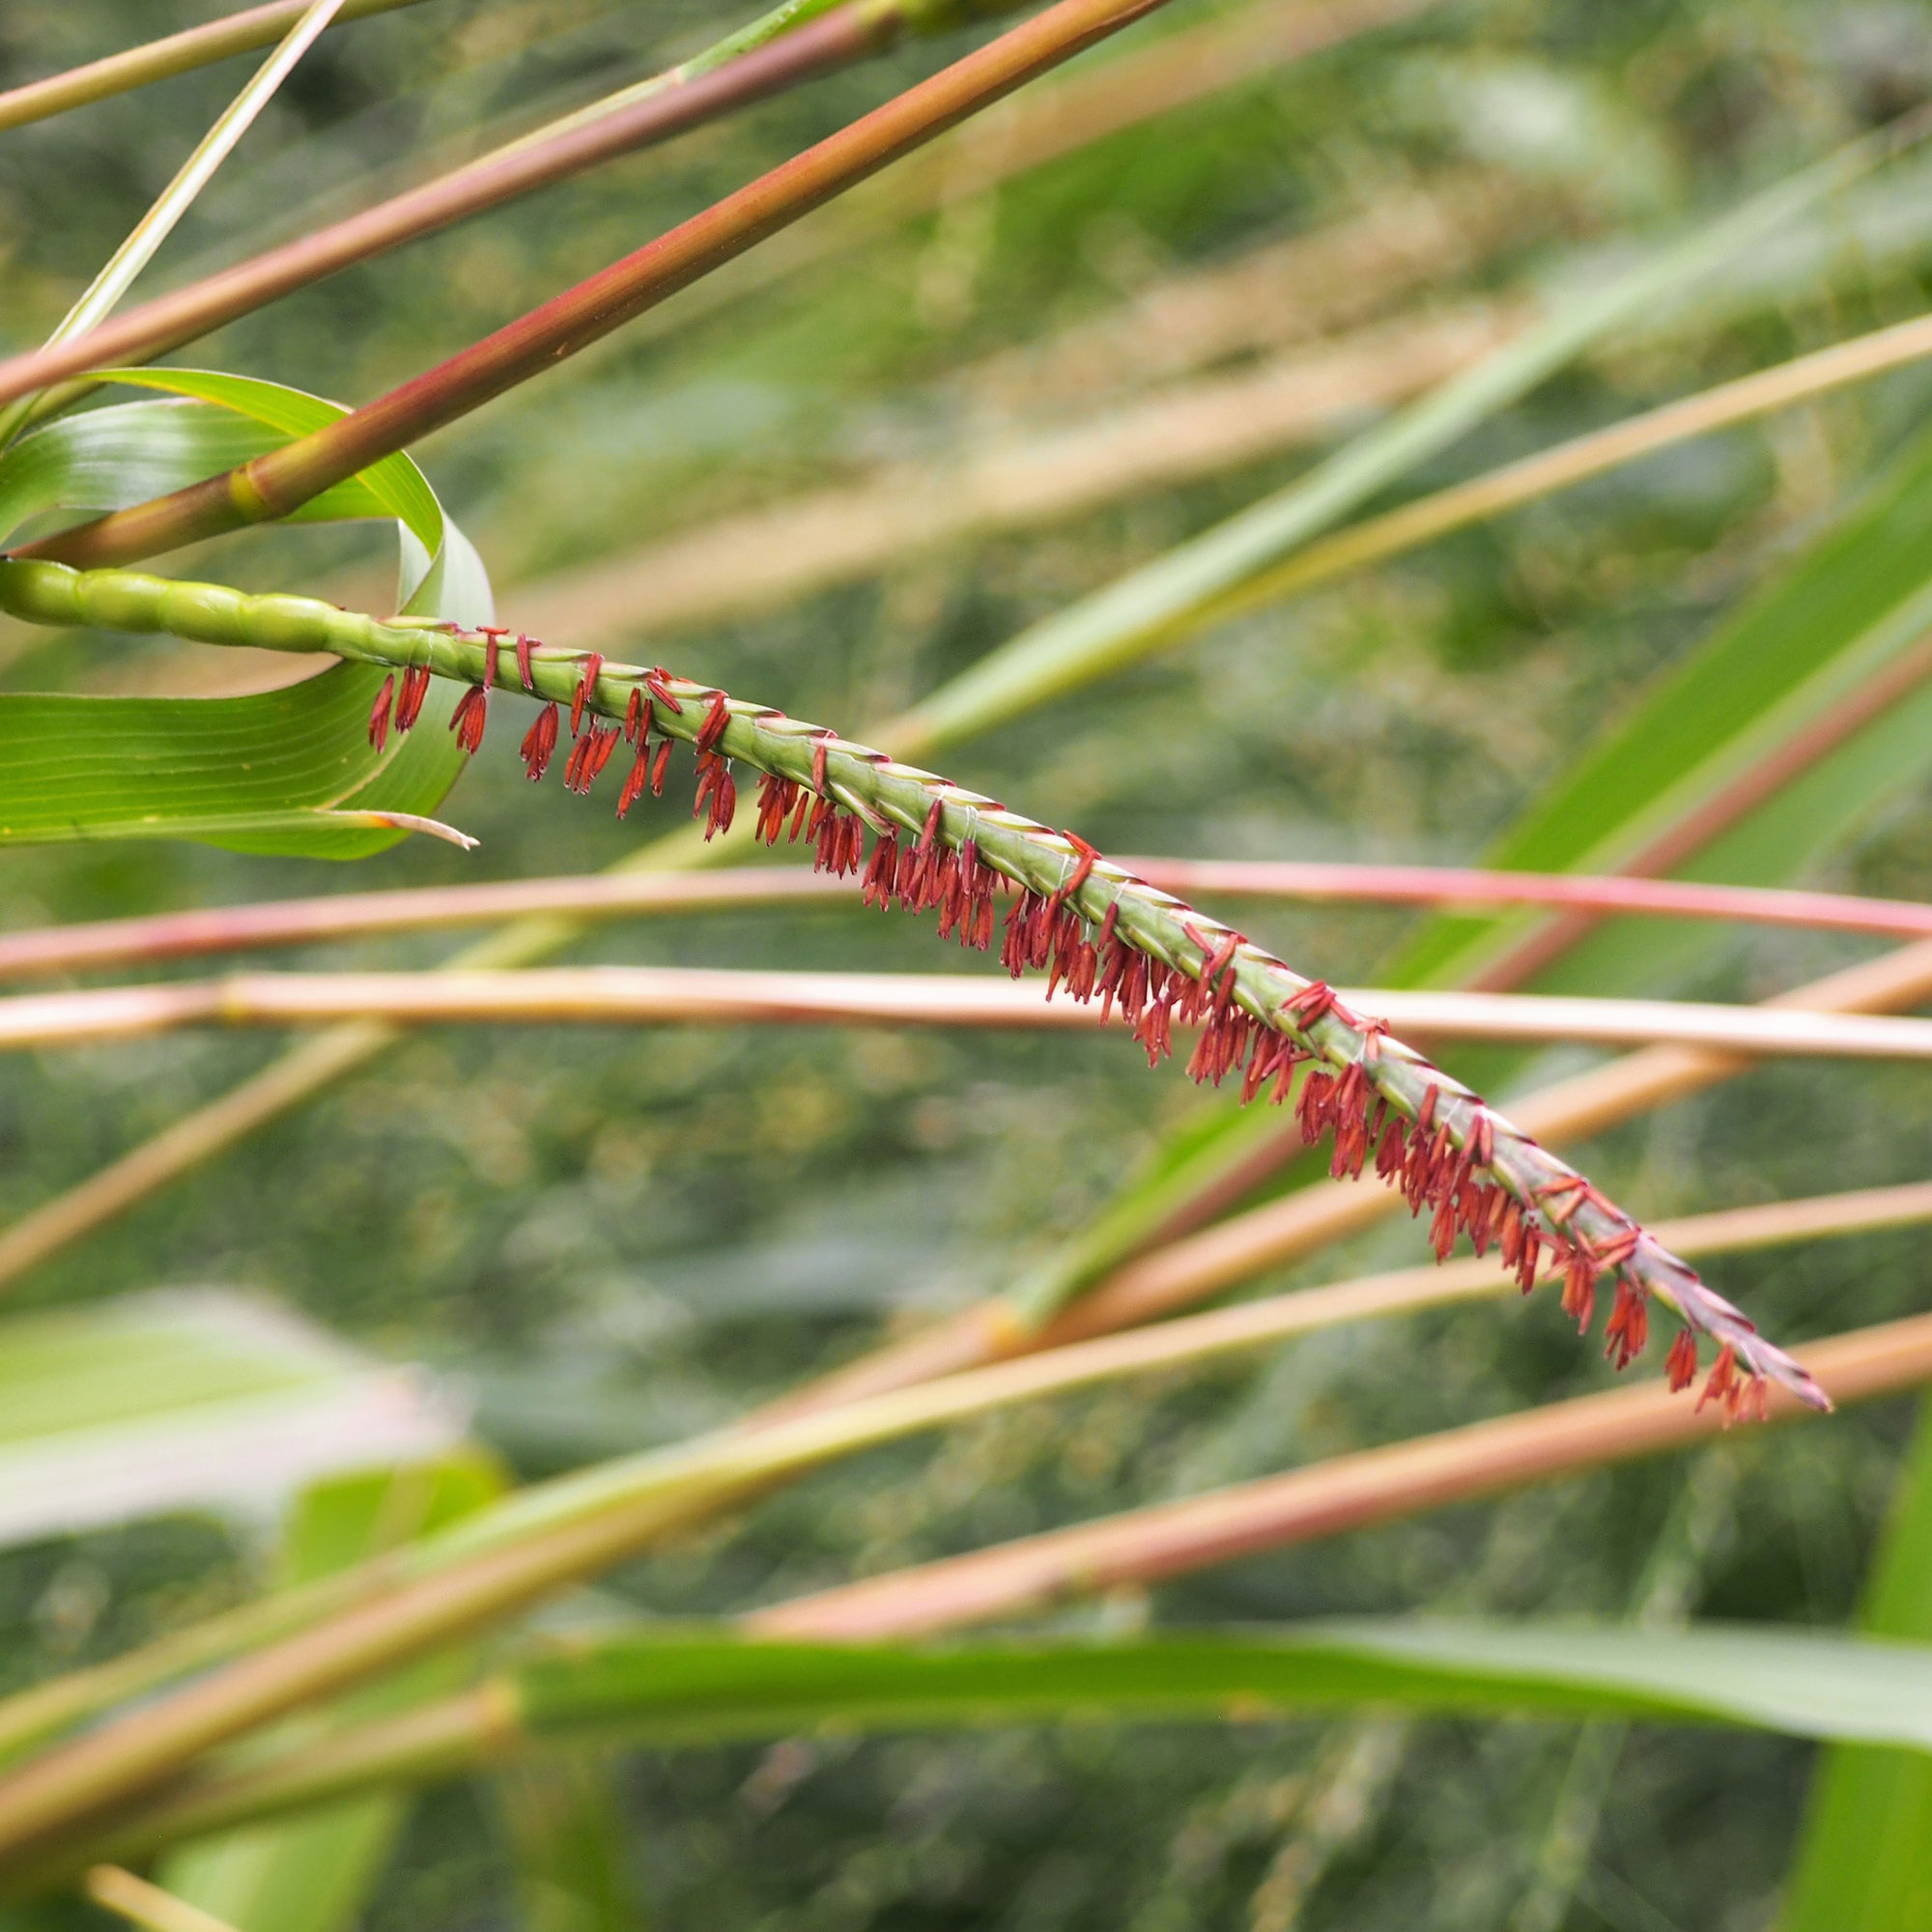 Photograph of an arcing eastern gamagrass inflorescence.